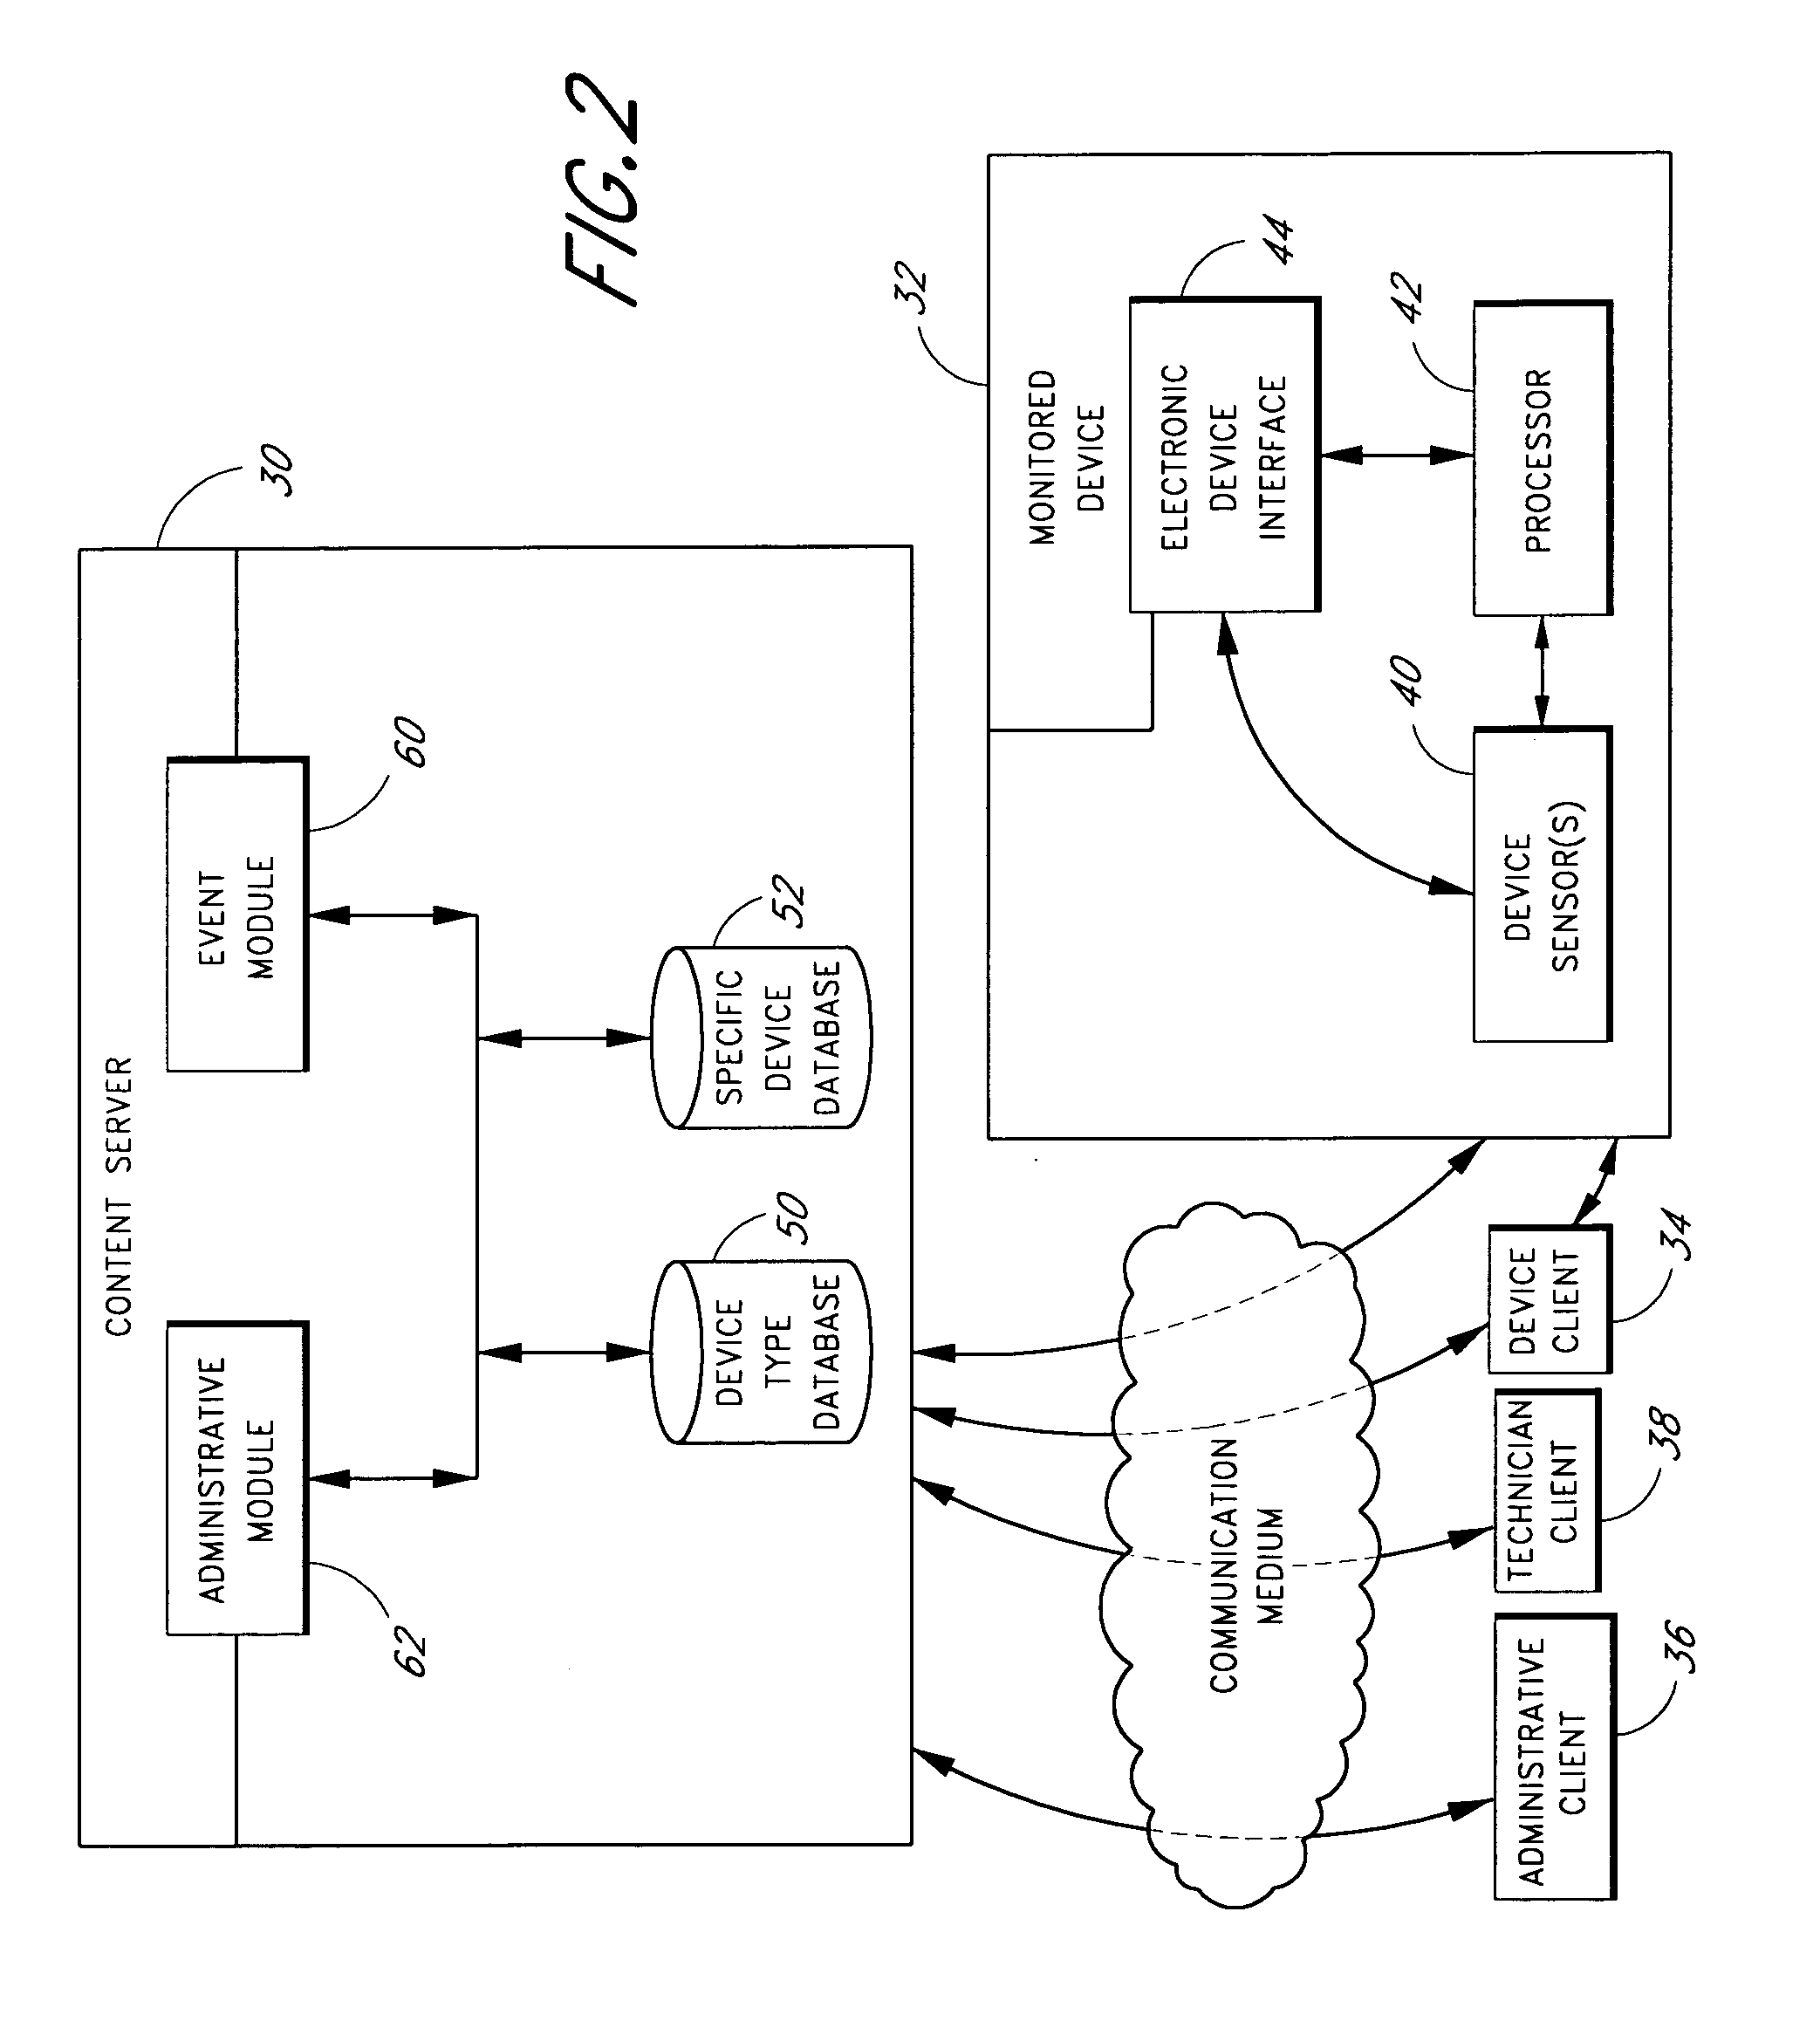 System and method for monitoring and responding to device conditions